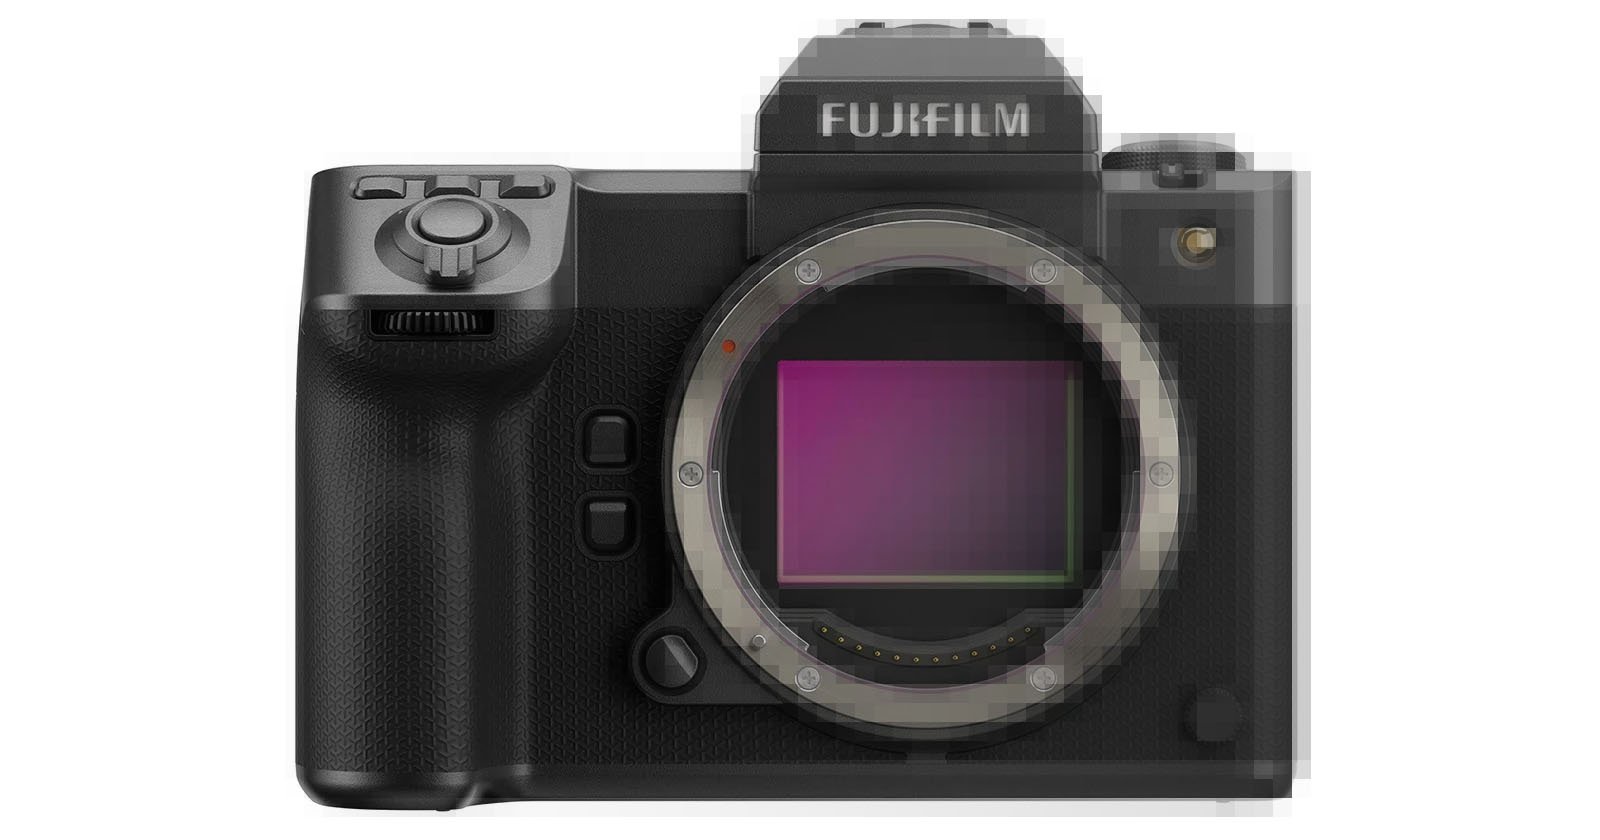  fujifilm isn telling whole truth about 